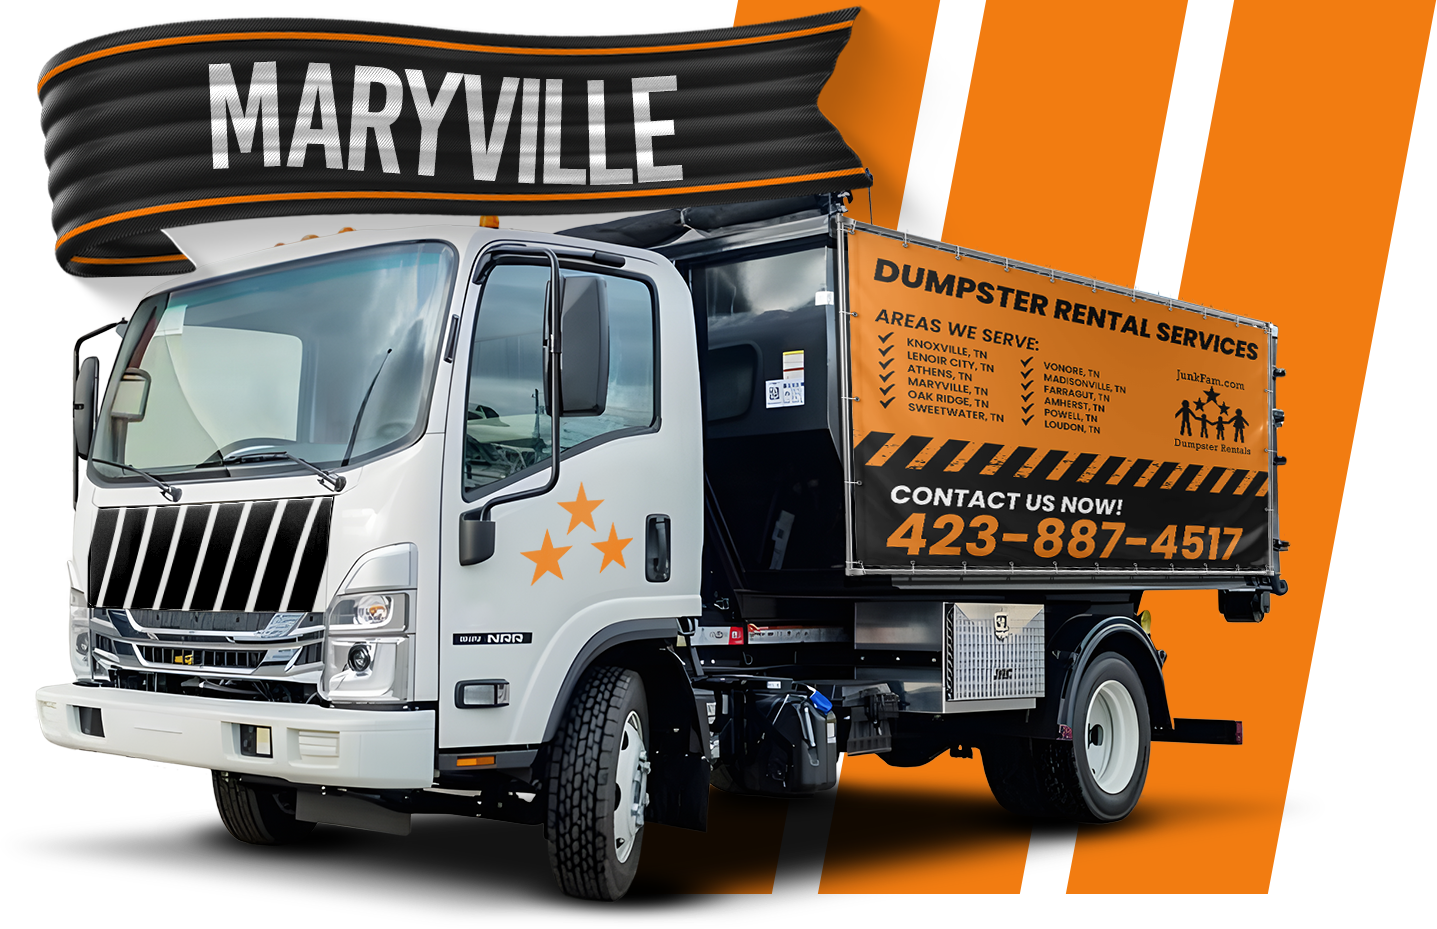 A dump truck is parked in front of a sign that says Maryville.